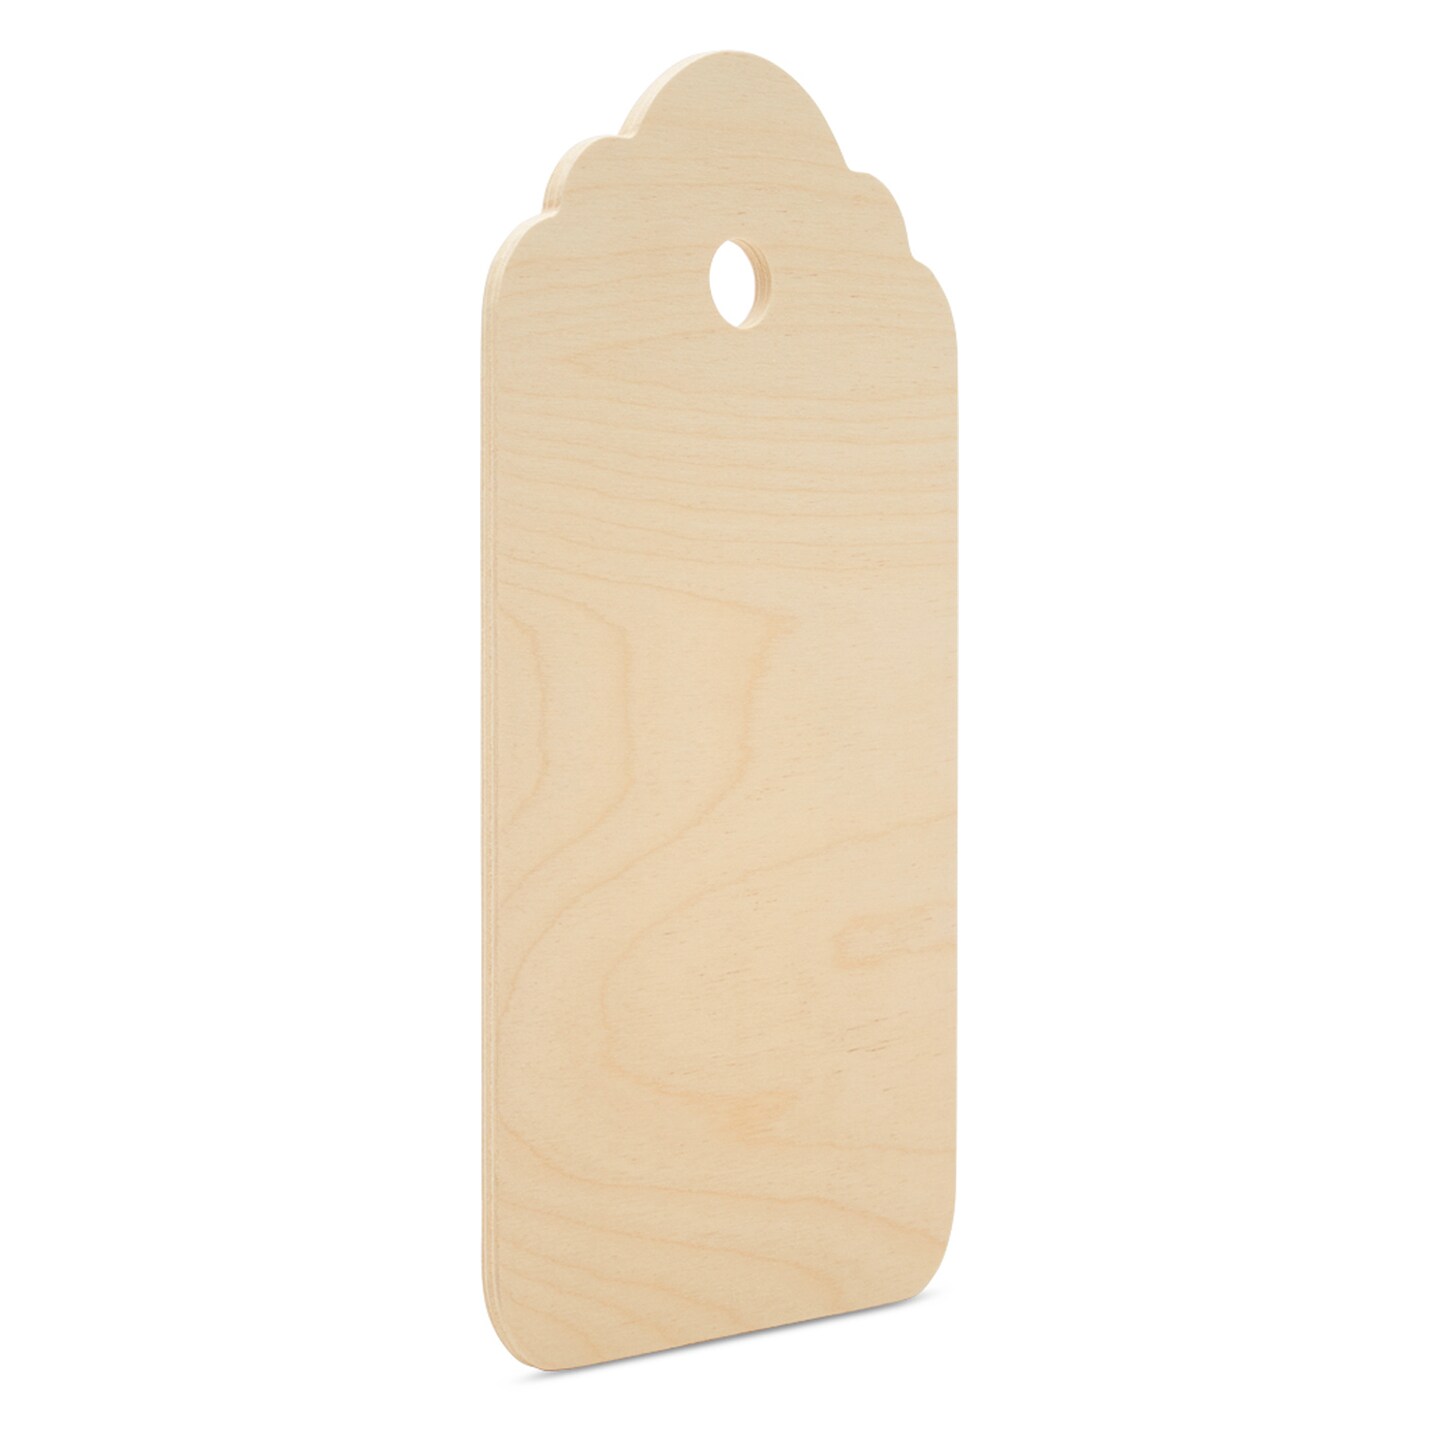 Wood Gift Tag Cutout, Multiple Sizes Available, Unfinished Tags for Gifts and Christmas | Woodpeckers